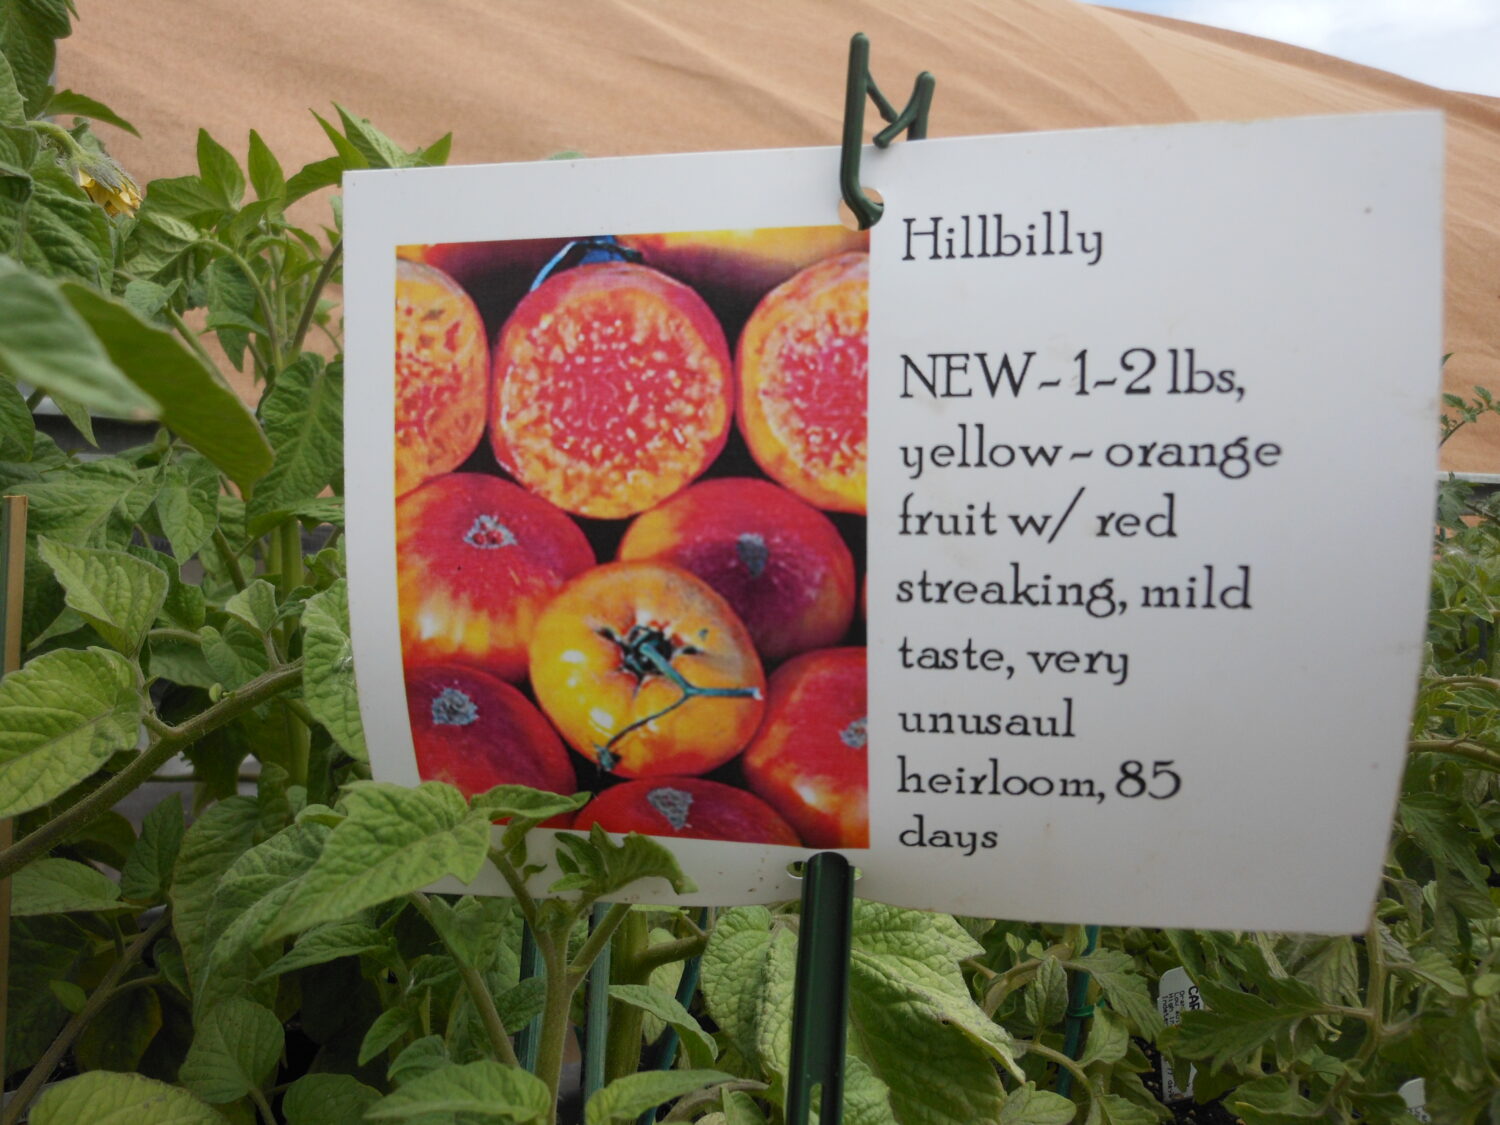 Carlsons’ Greenhouse in Fenton, Michigan, has great signs showing benefits not features. Descriptions of the color and flavor are much more appetizing than how tall the plant grows or how far apart to space them.